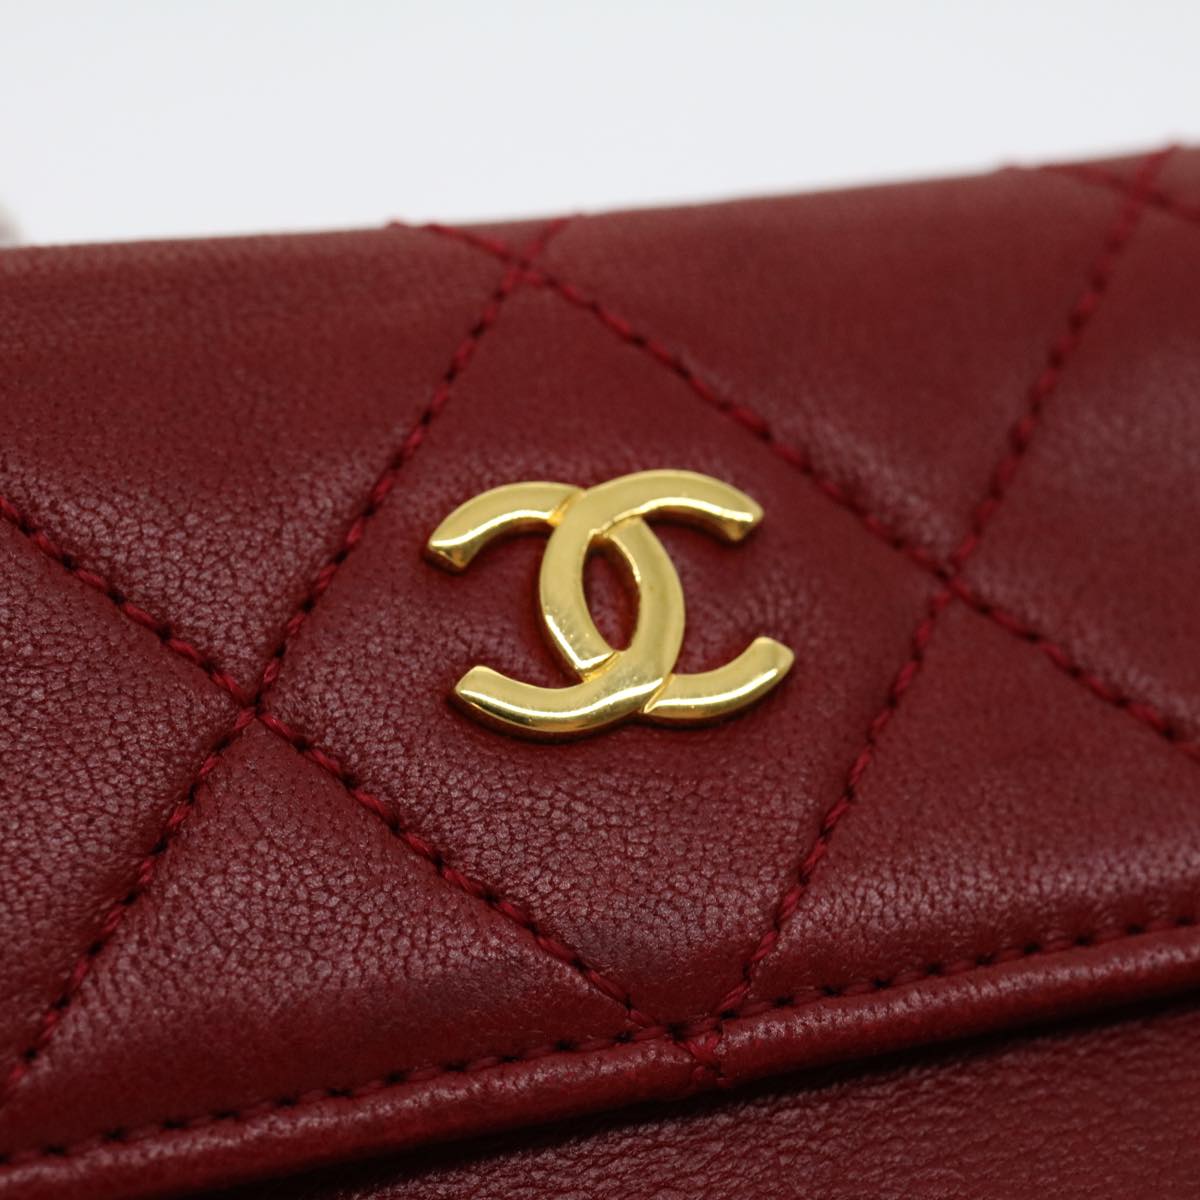 CHANEL Matelasse Double Chain Shoulder Bag Cotton Leather Red CC Auth 30896A